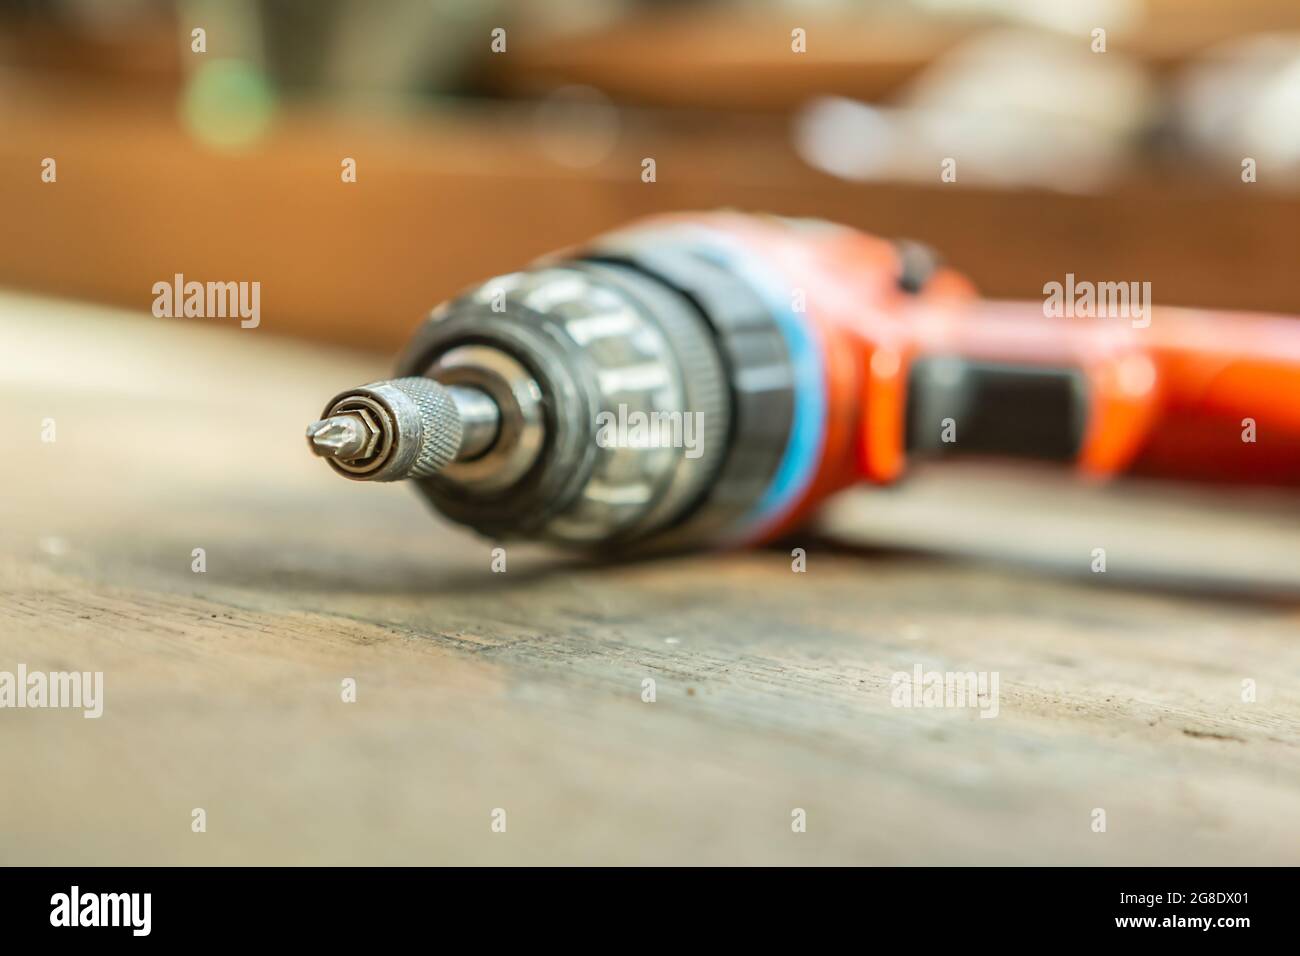 Close-up of a cordless screwdriver on a workbench Stock Photo